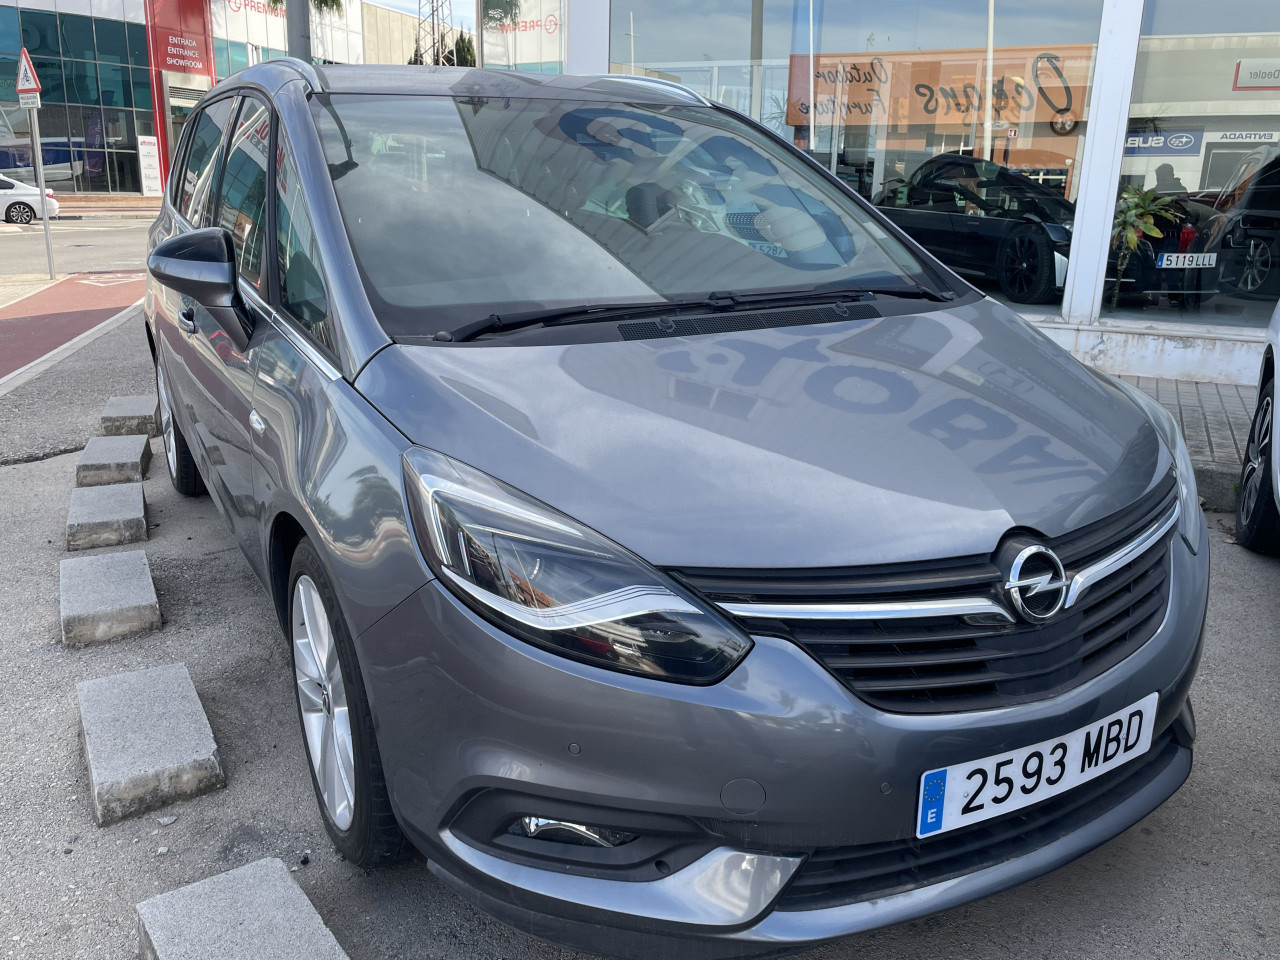 Opel Zafira 2.0 Crdi Touring Automatic People carrier